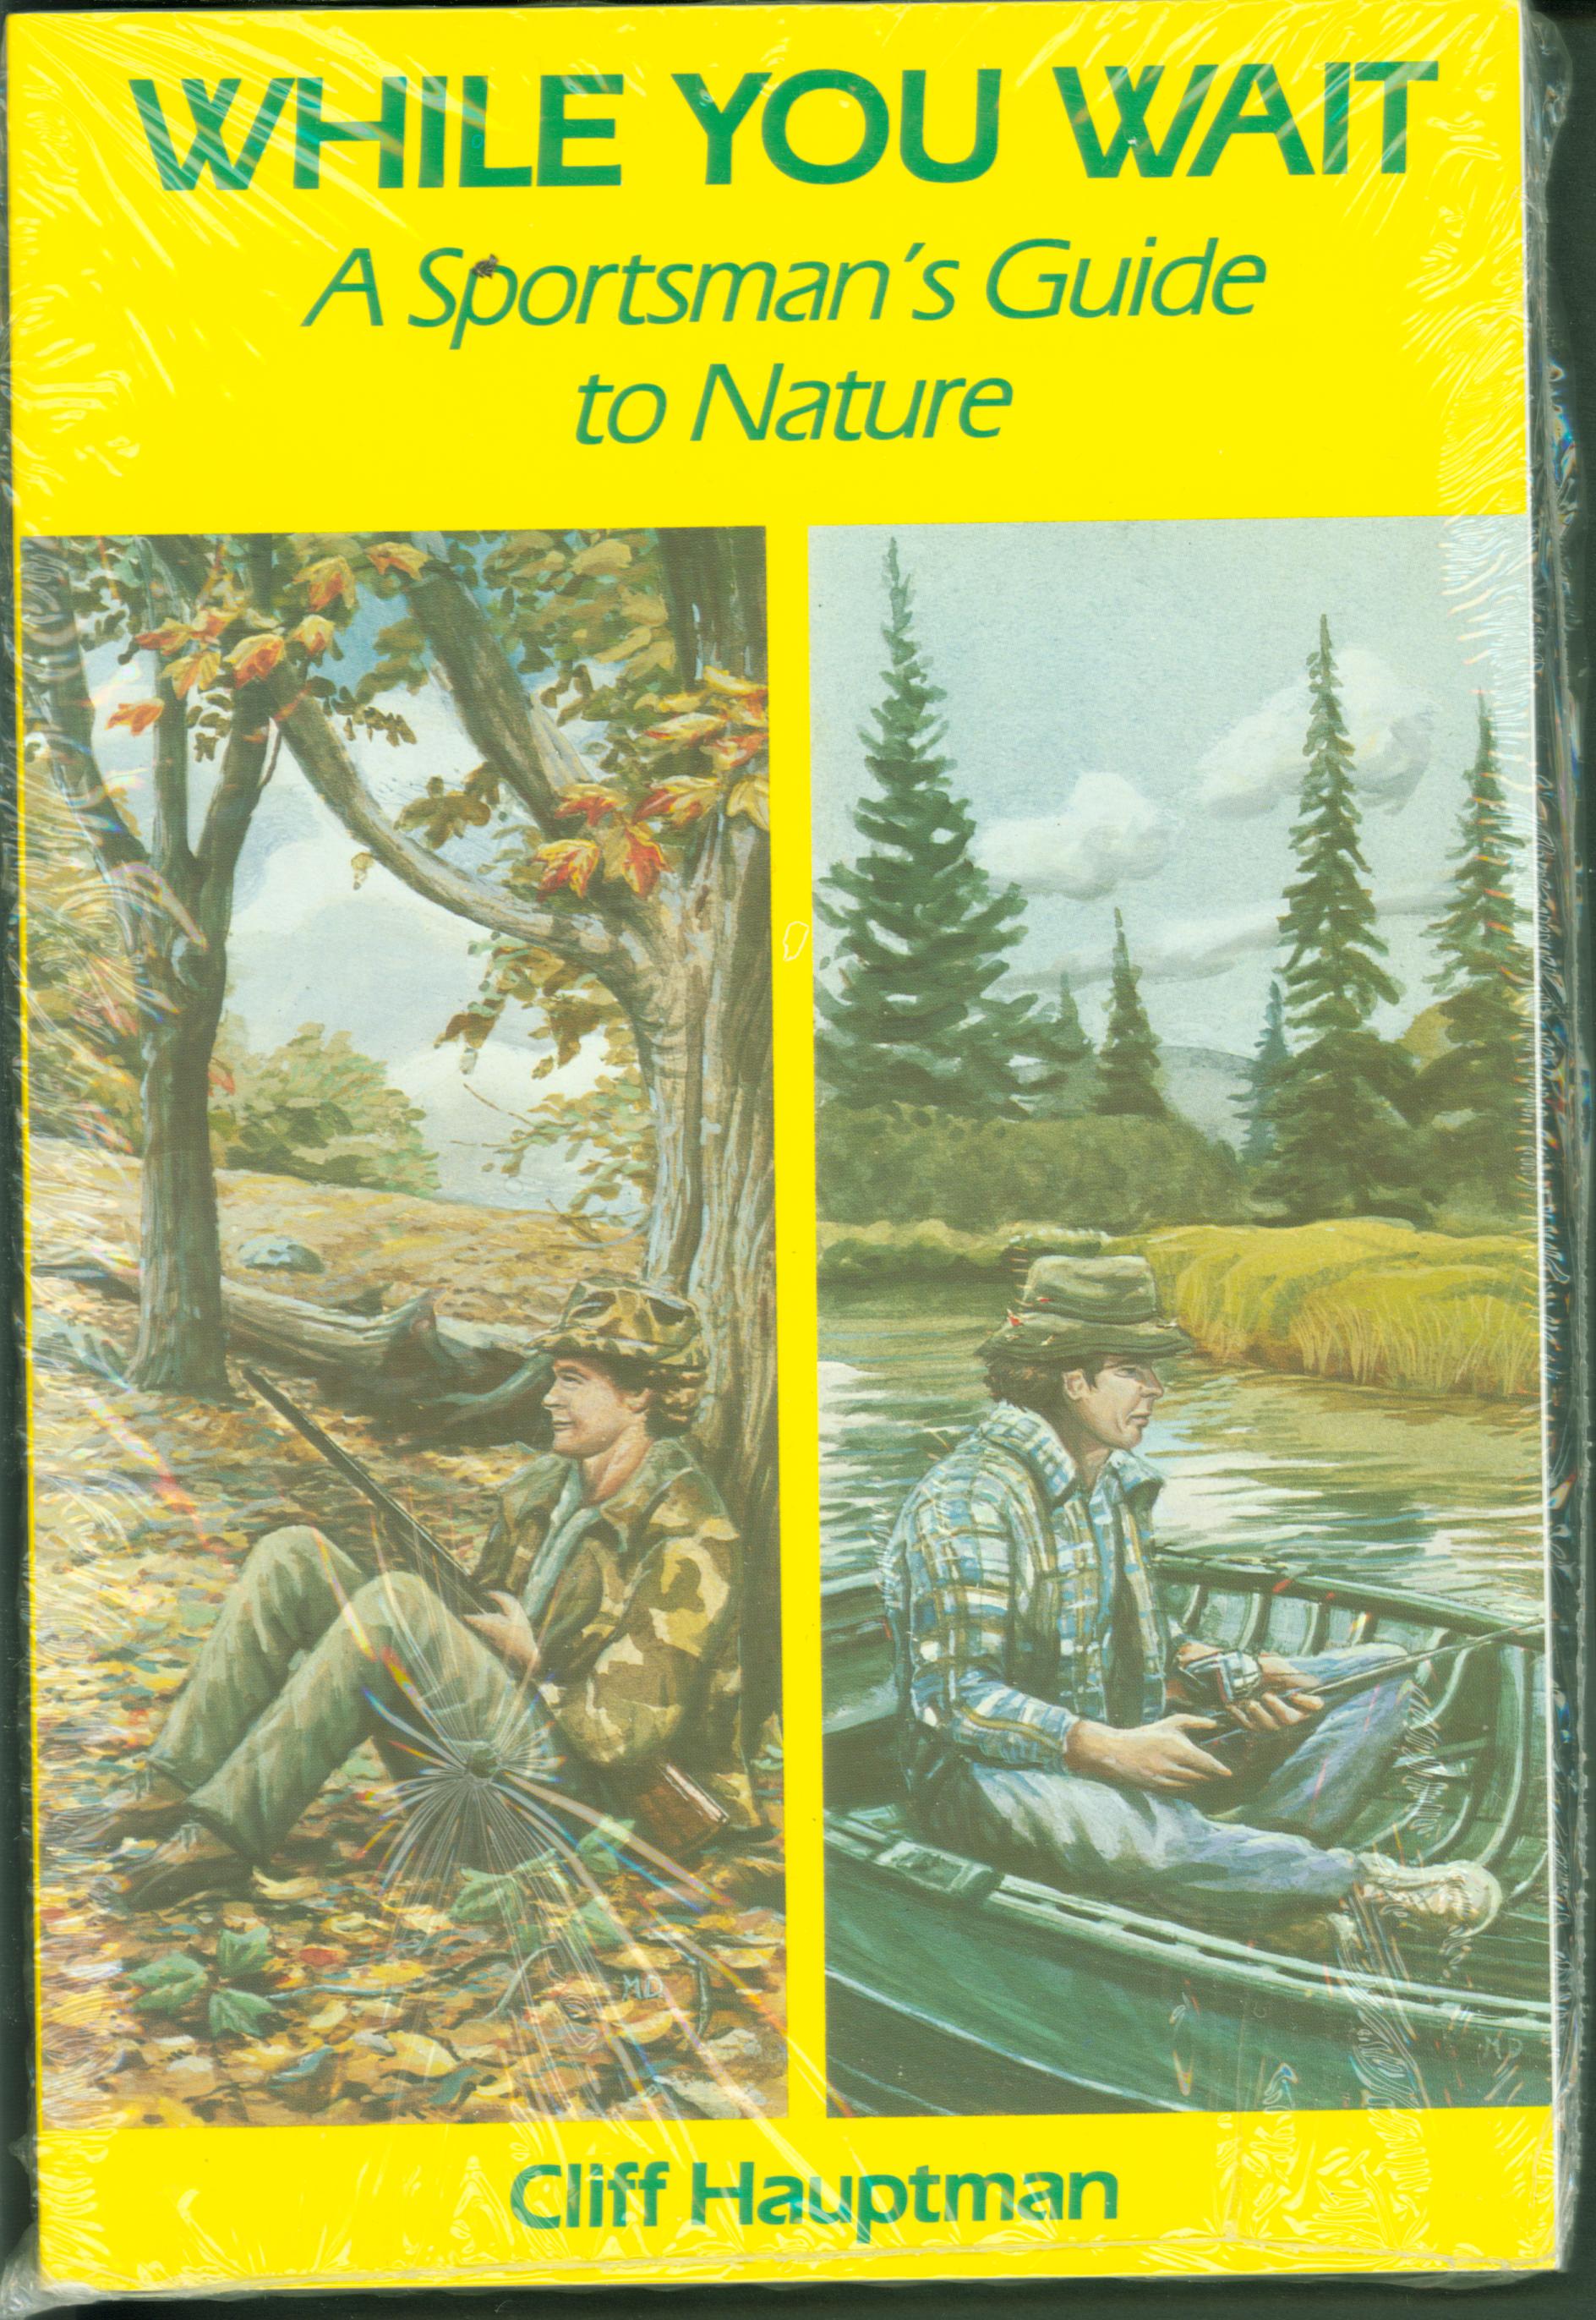 WHILE YOU WAIT: a sportsman's guide to Nature.